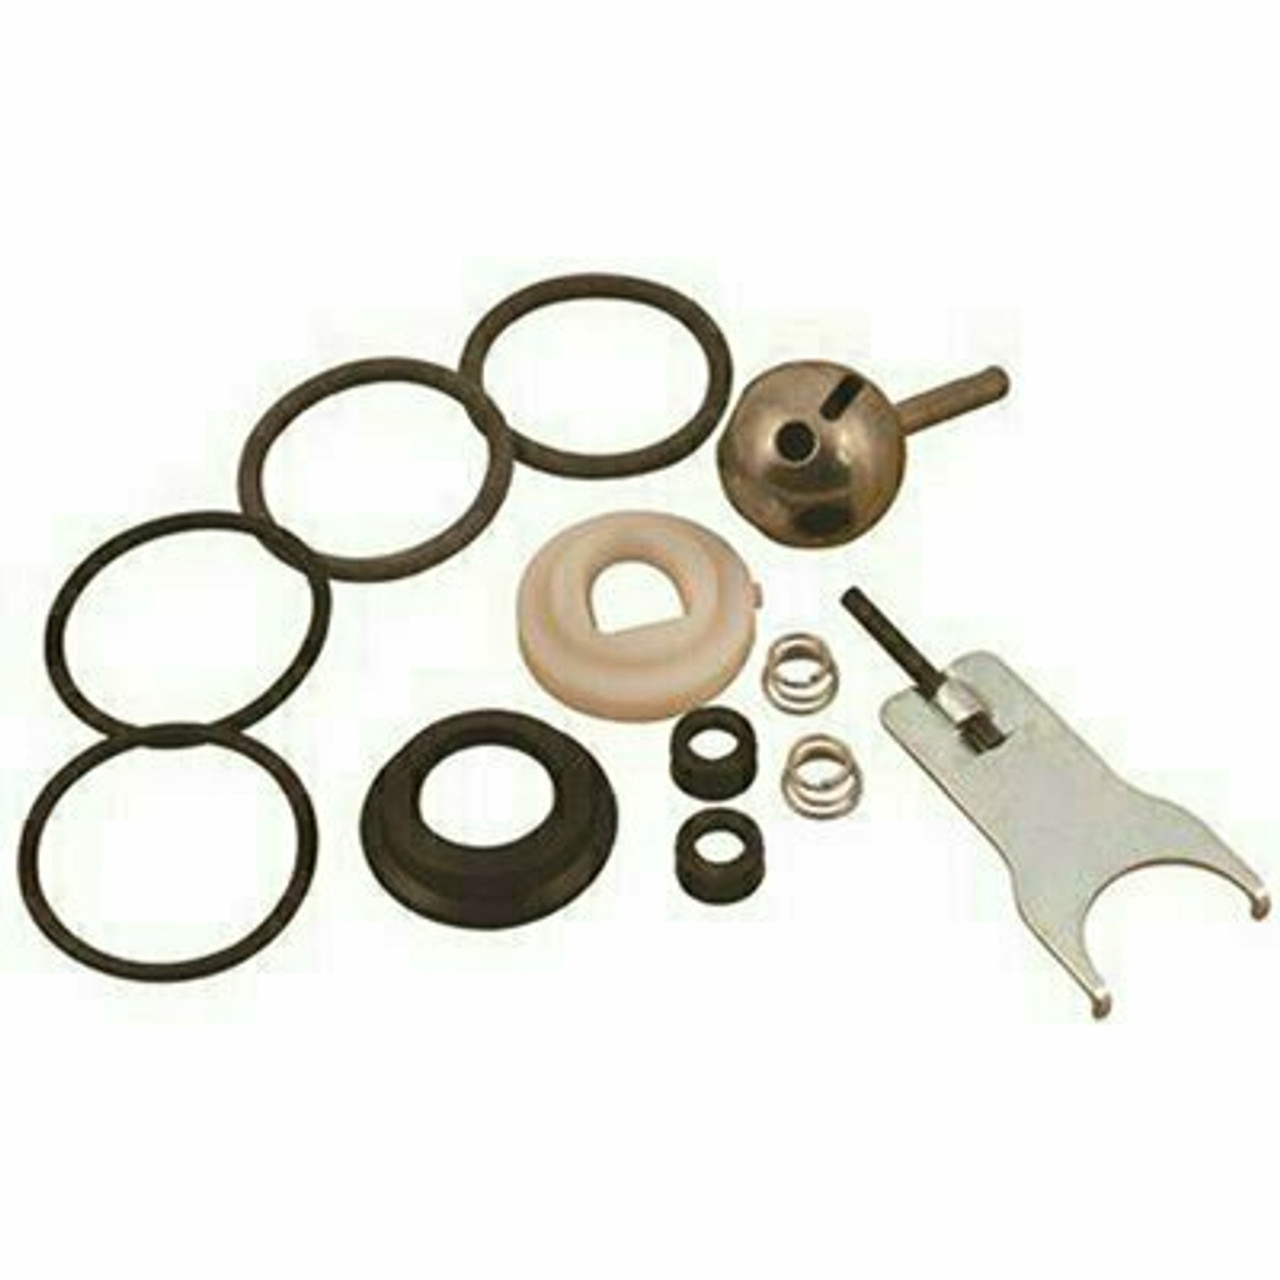 Delta Repair Kit For Kitchen Faucets